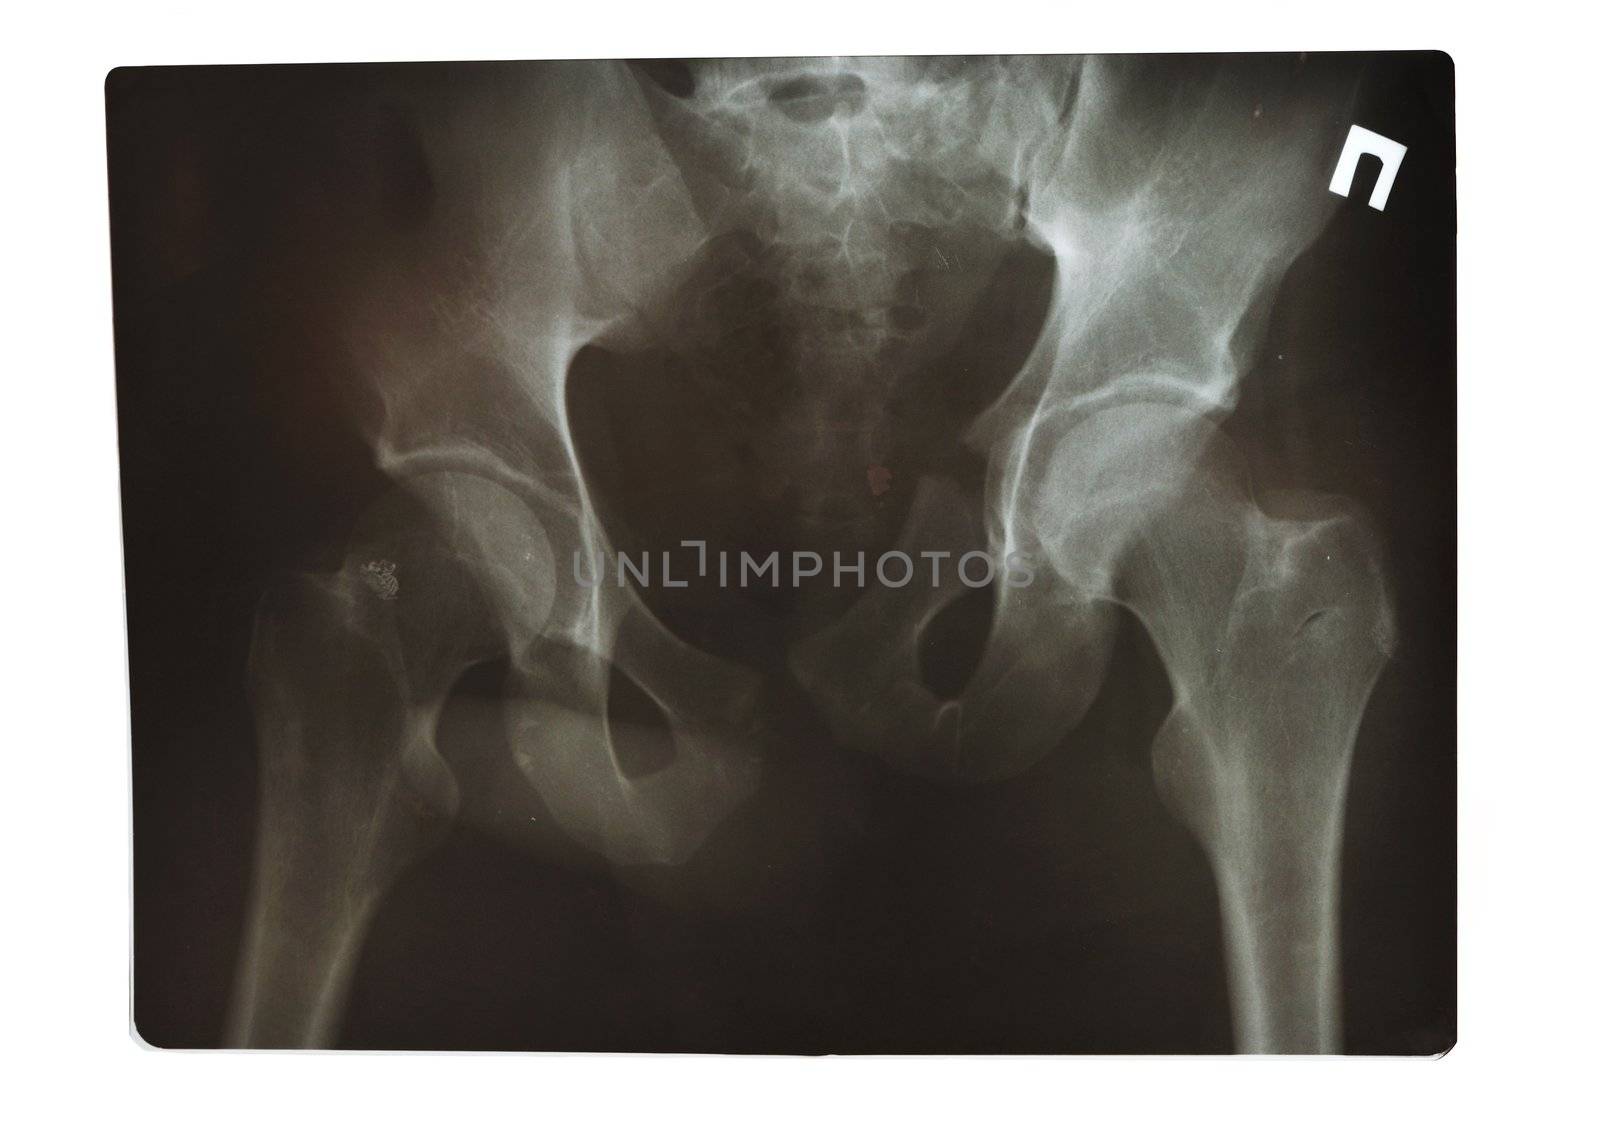 X-Ray shot by haveseen